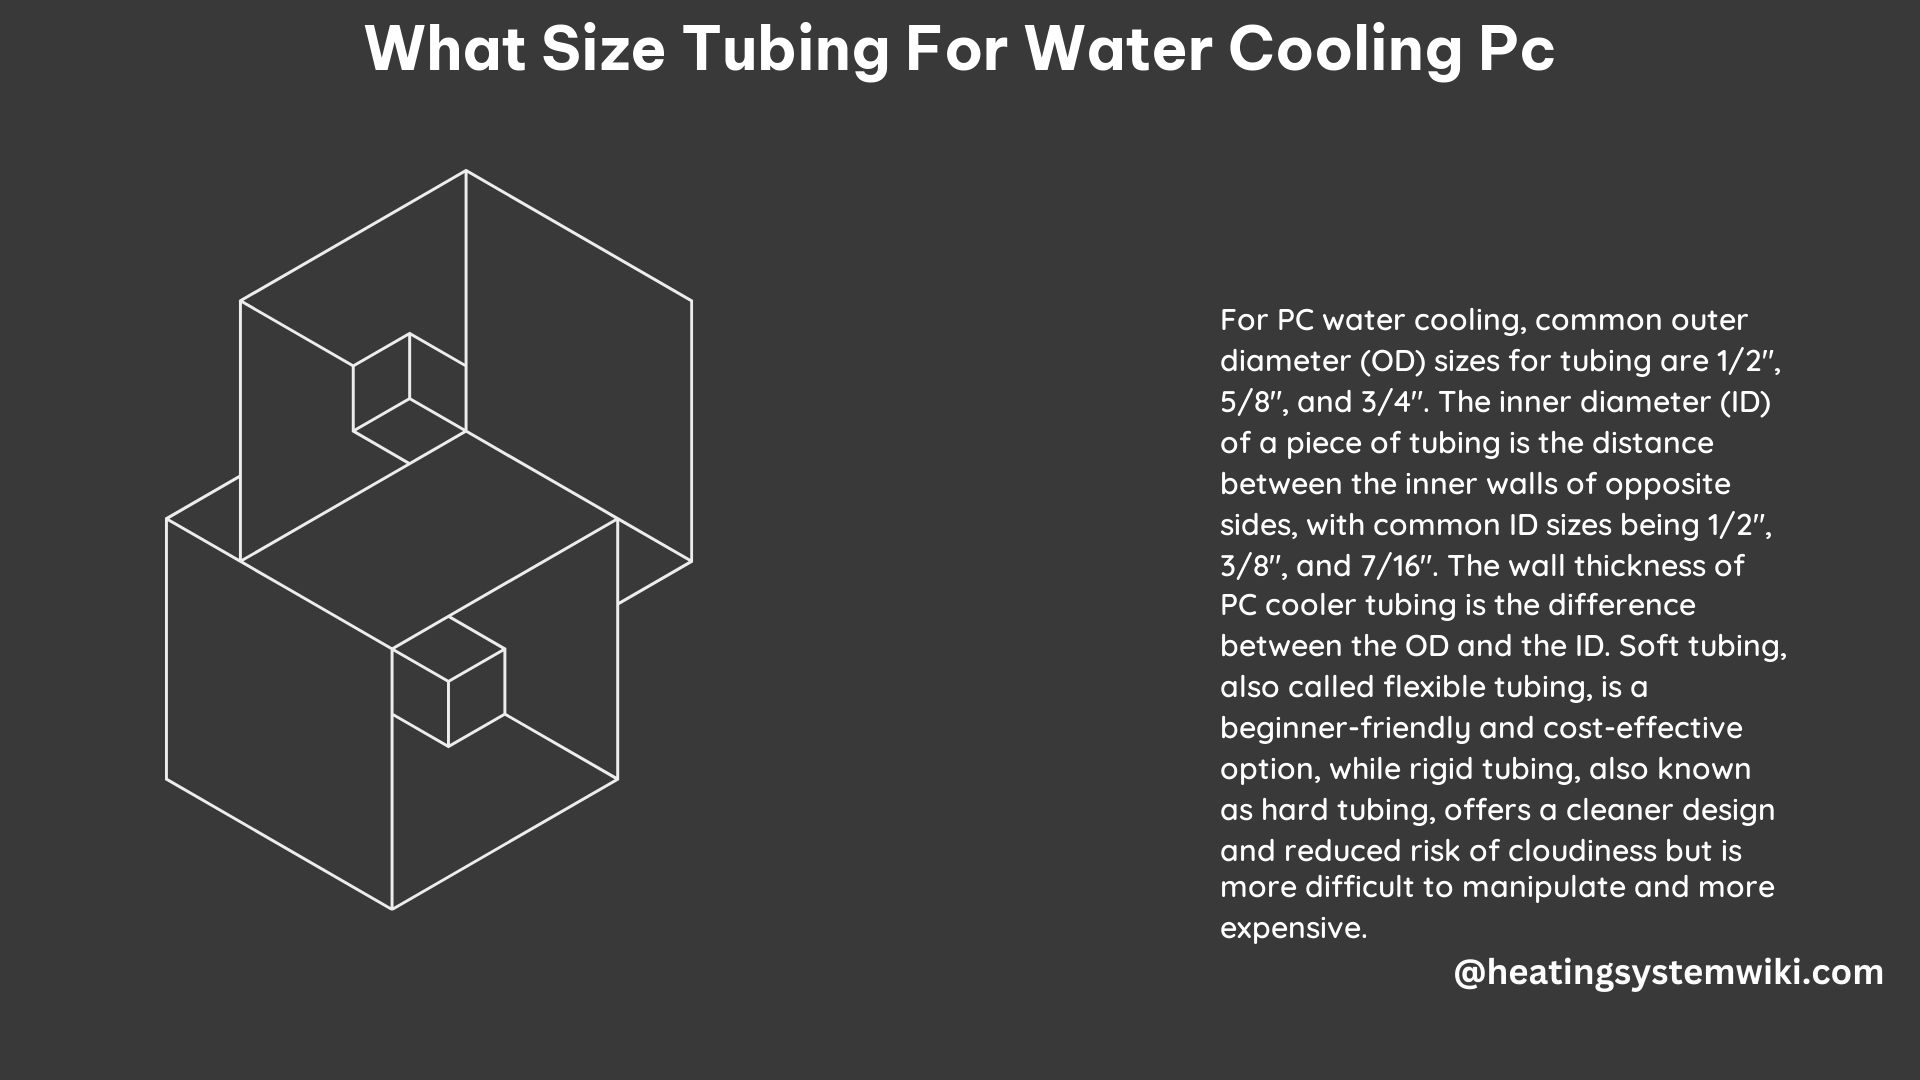 What Size Tubing for Water Cooling PC